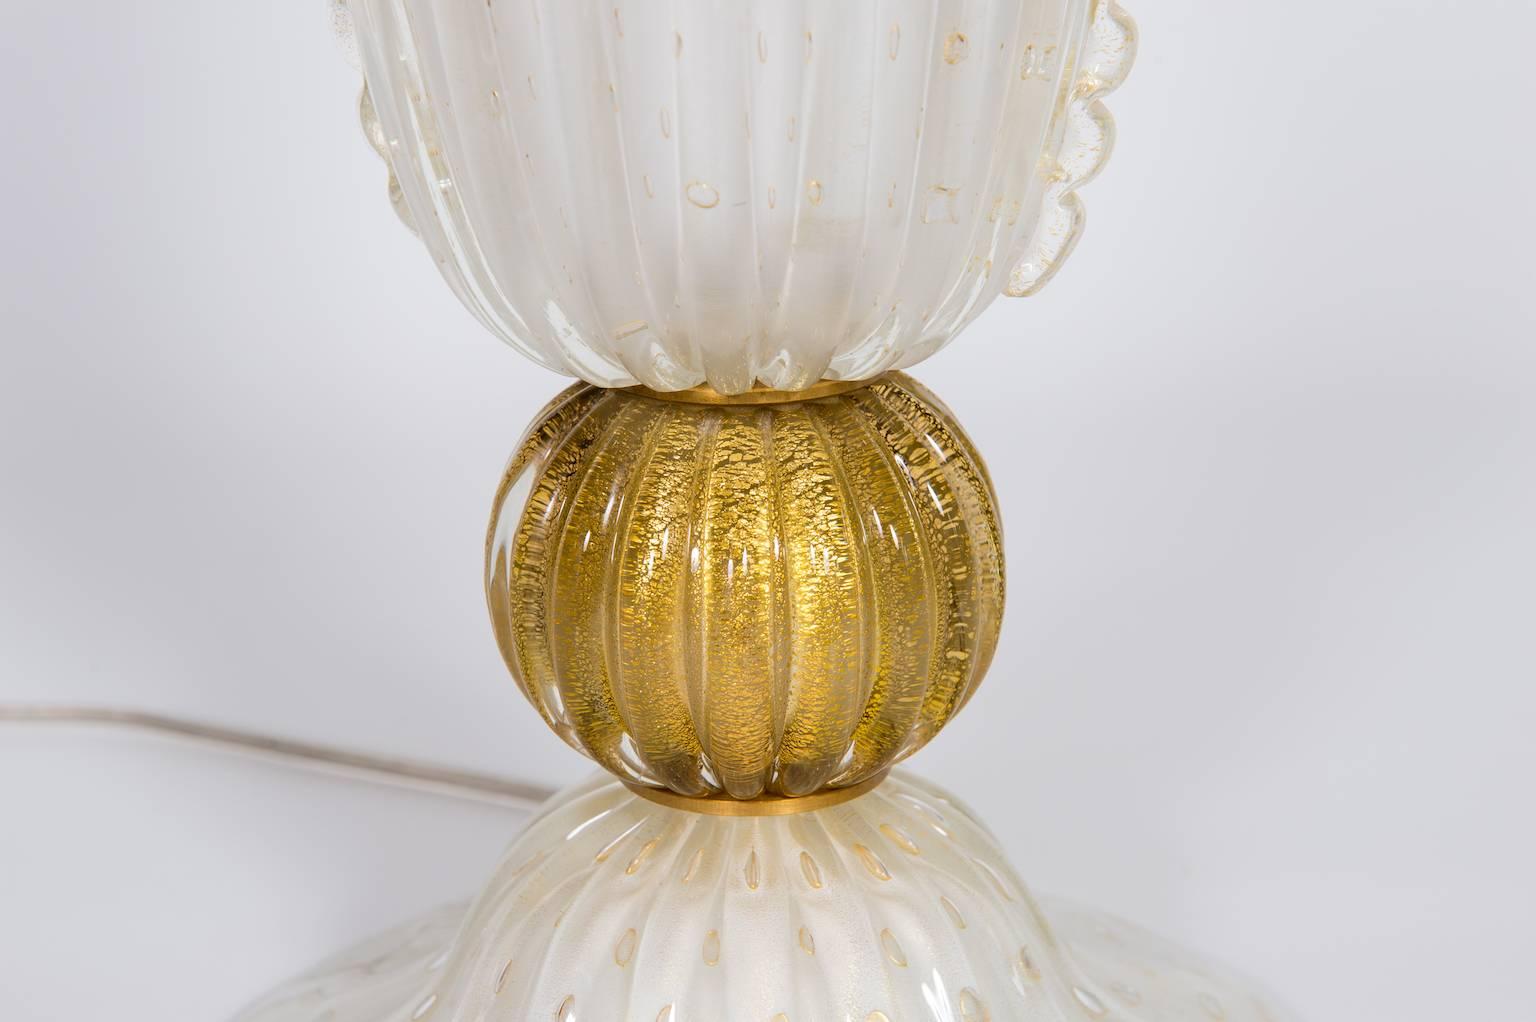 Hand-Crafted Italian Table Lamp in Blown Murano Glass, White and 24kt Gold Finishes, 1970s For Sale